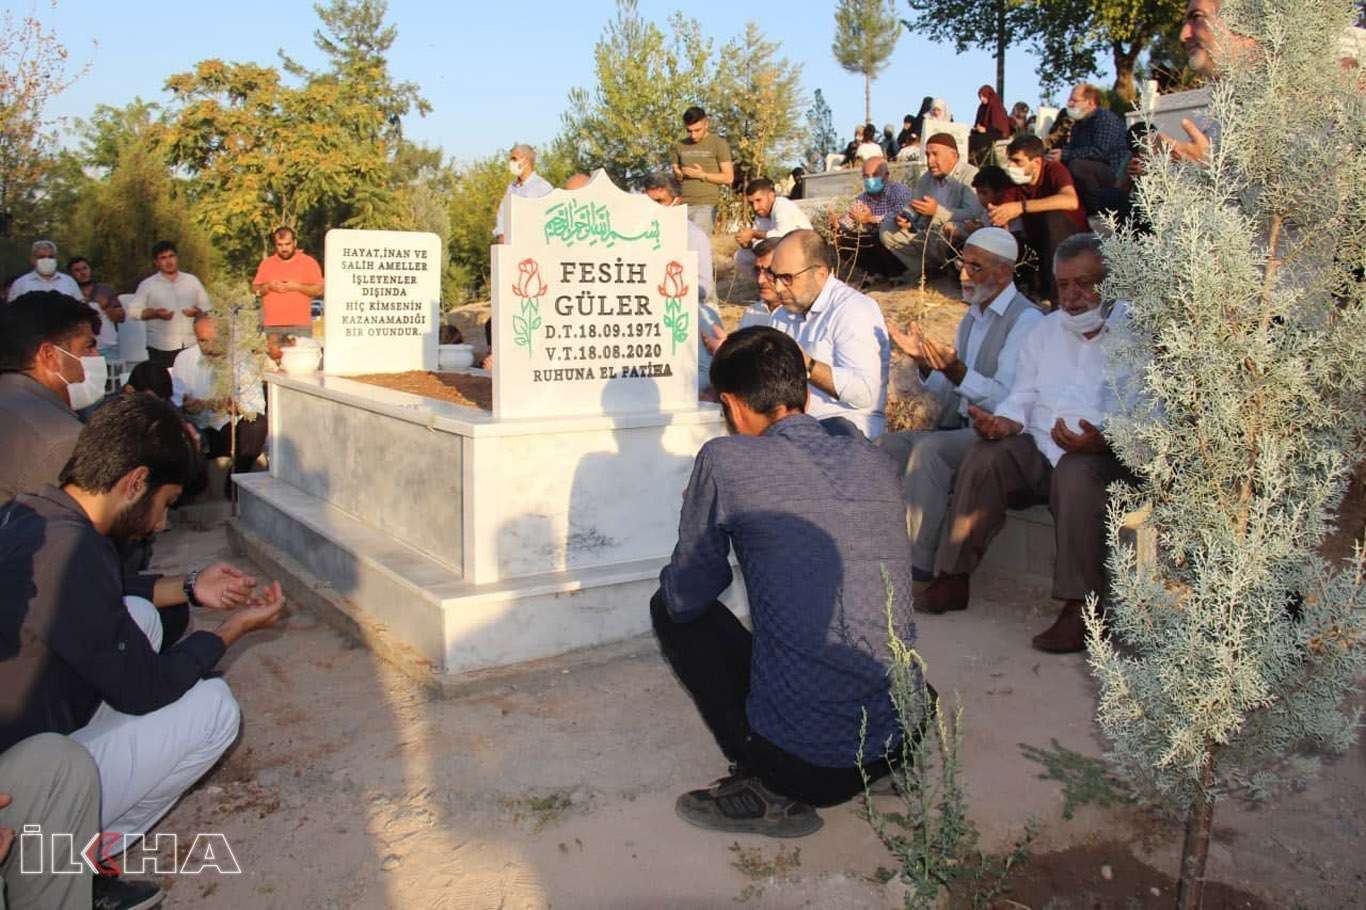 Fesih Güler commemorated on the first anniversary of his death